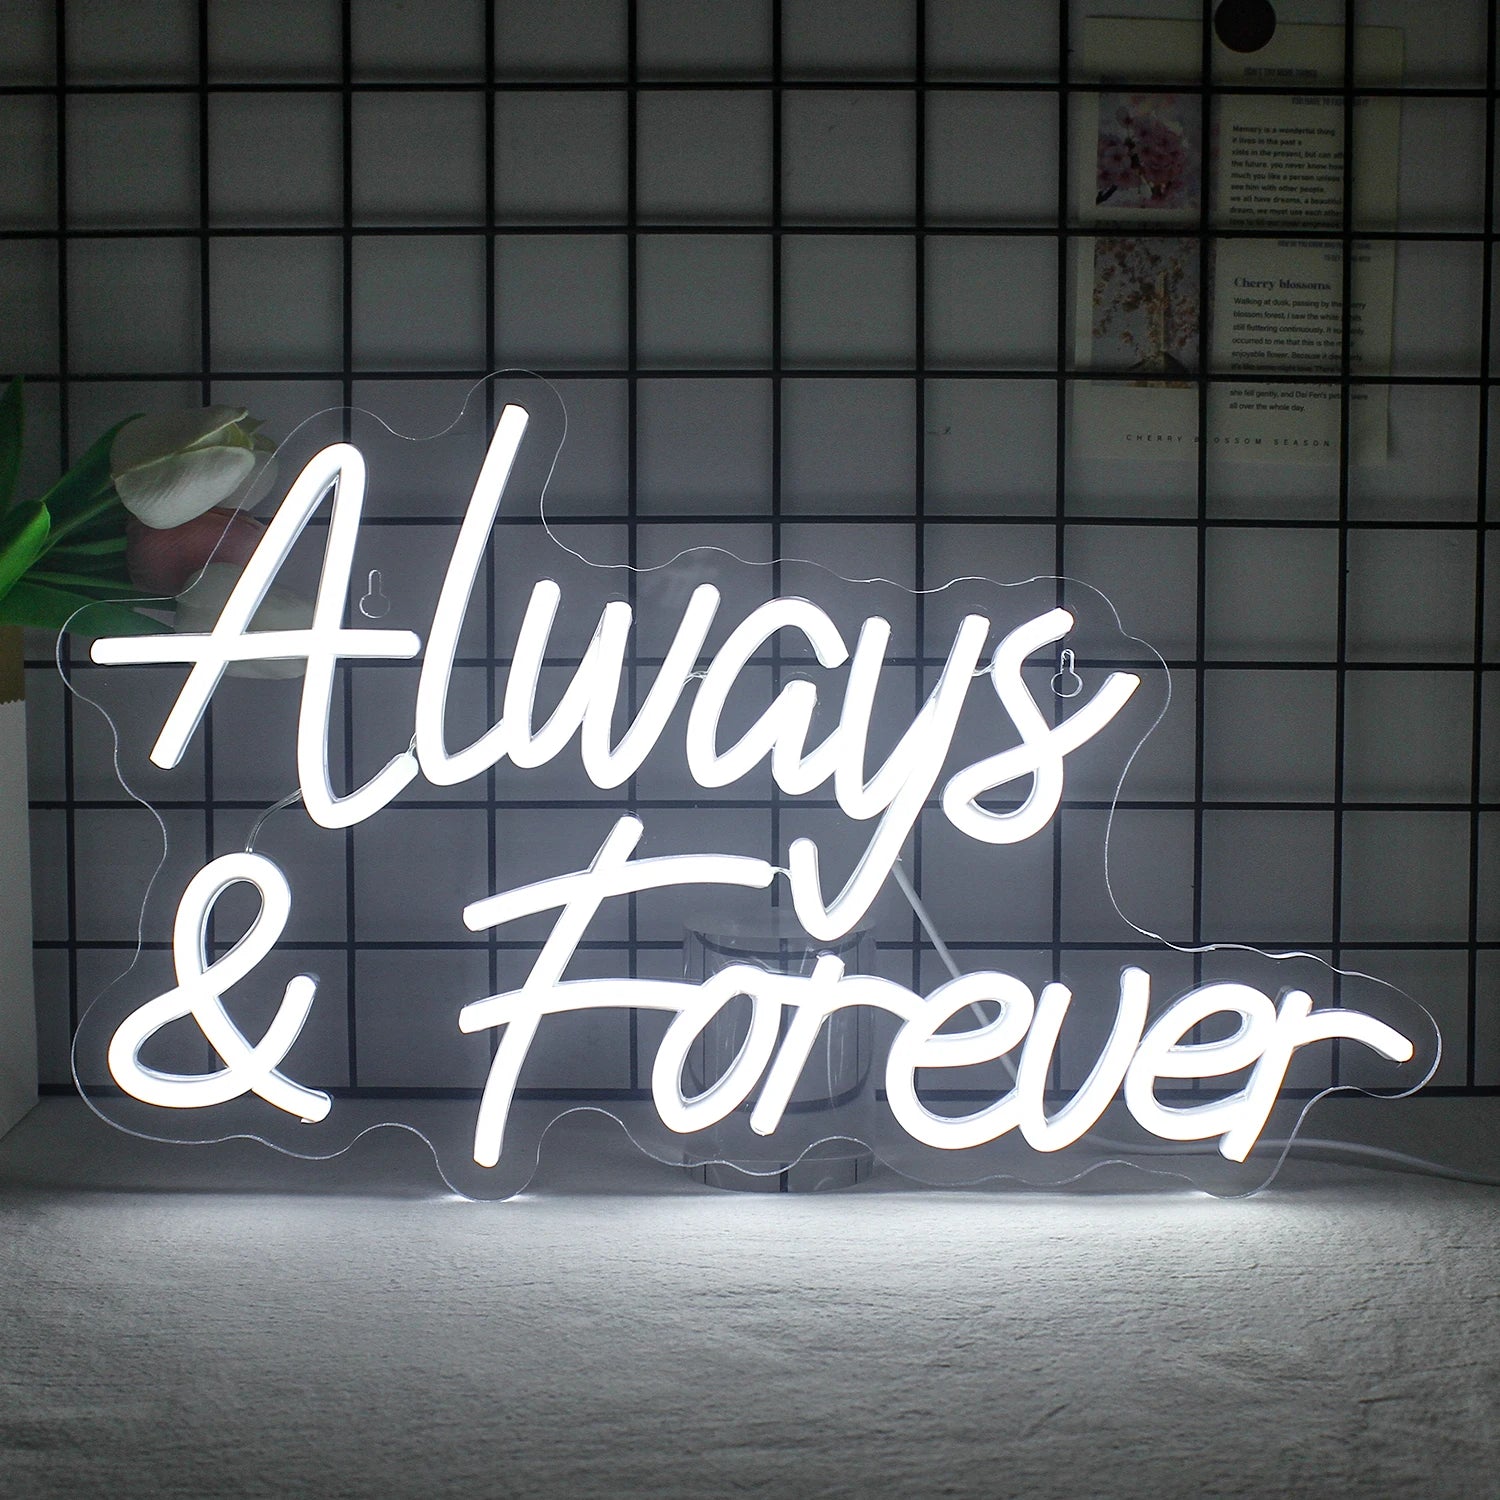 Ineonlife Always Forever Neon Sign Light Wedding Style Proposal Personalized Gift Led Party Bedroom Home Club Wall Decor